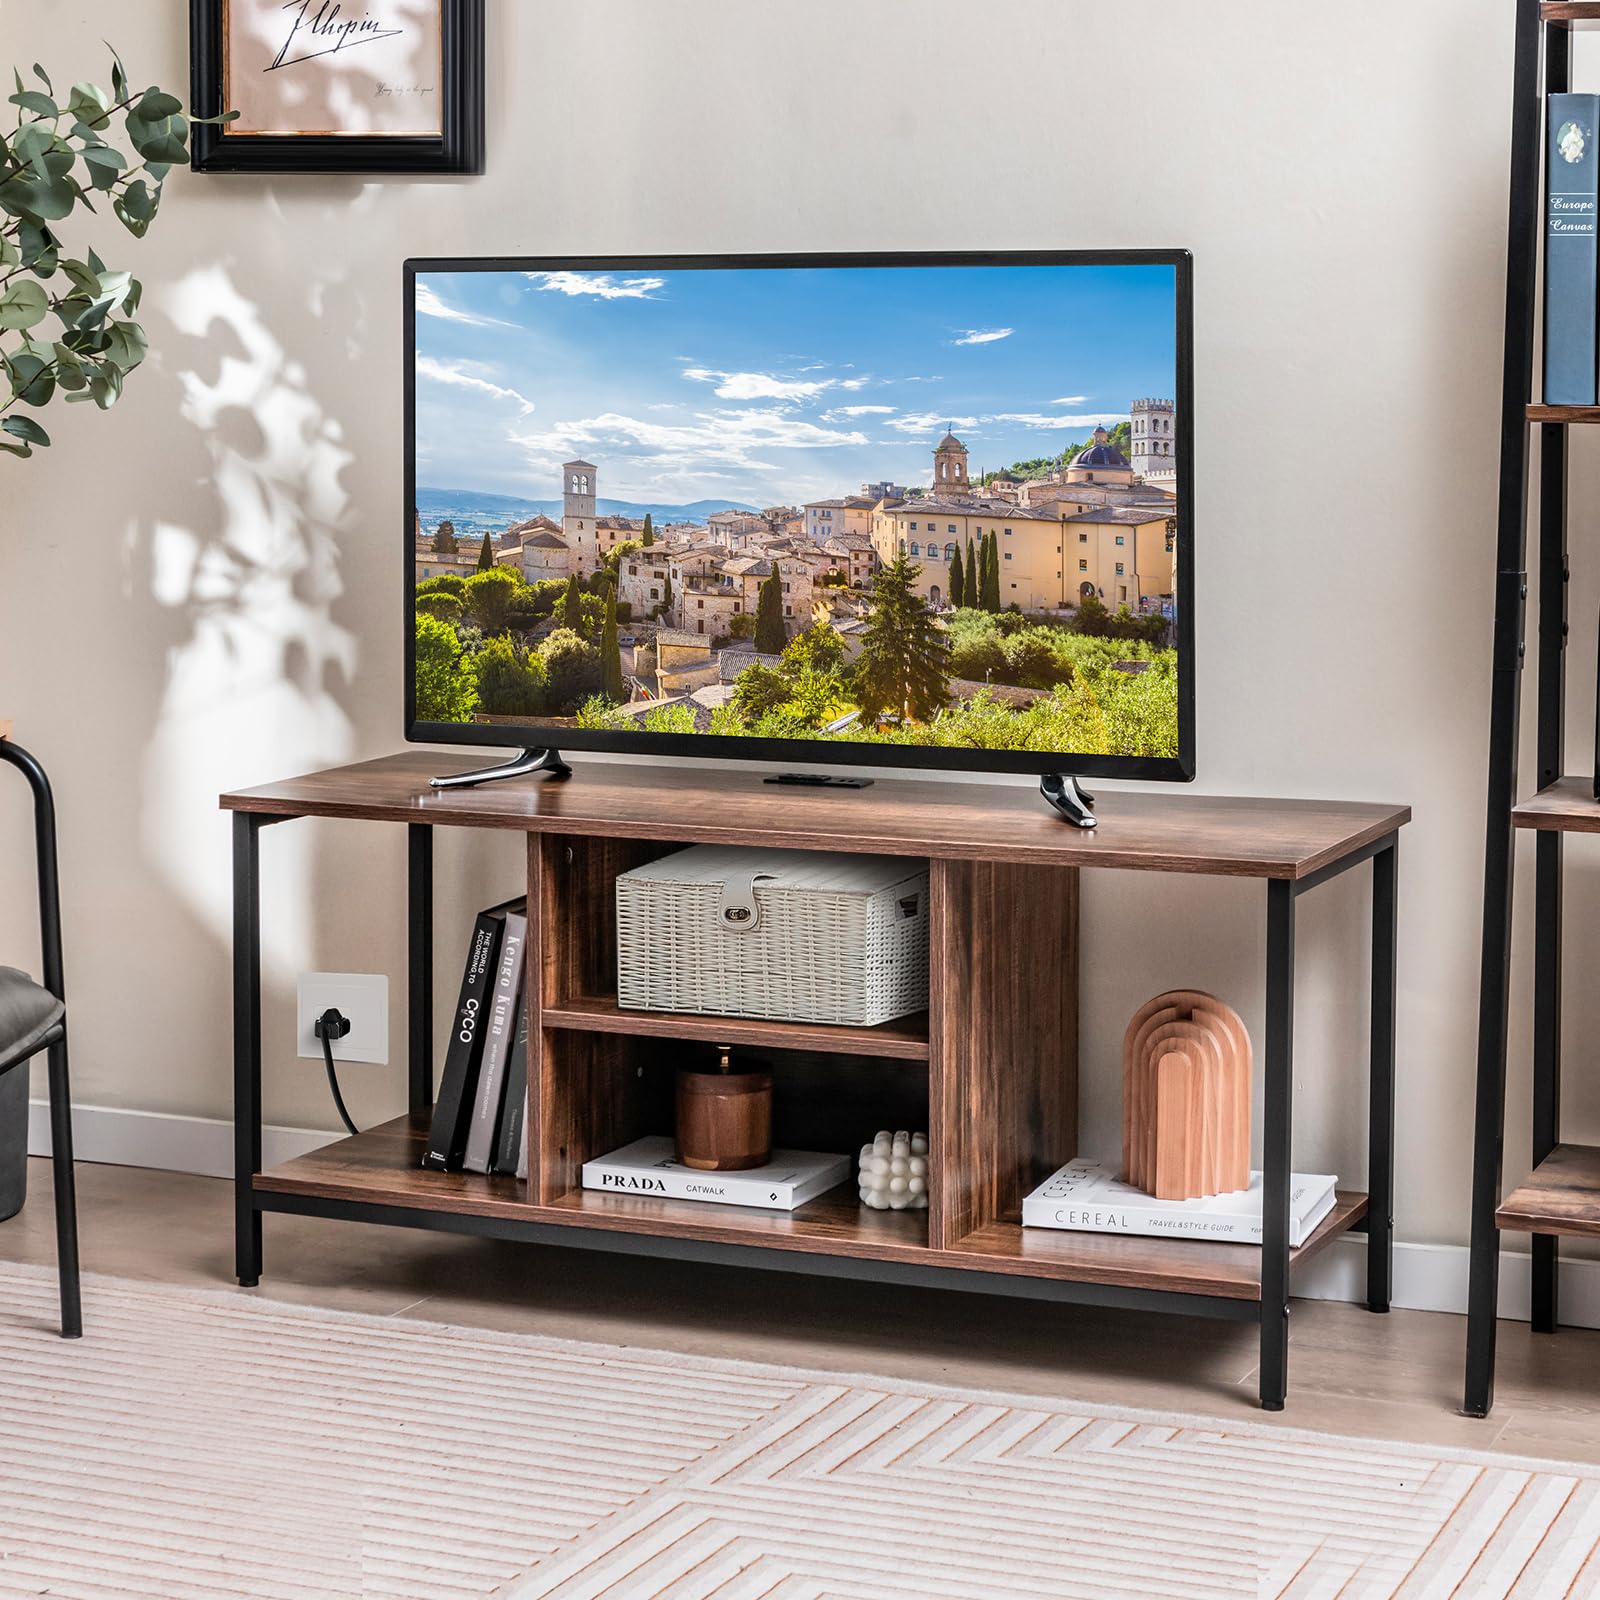 Giantex TV Stand for Bedroom, Entertainment Center for 50 Inch TV